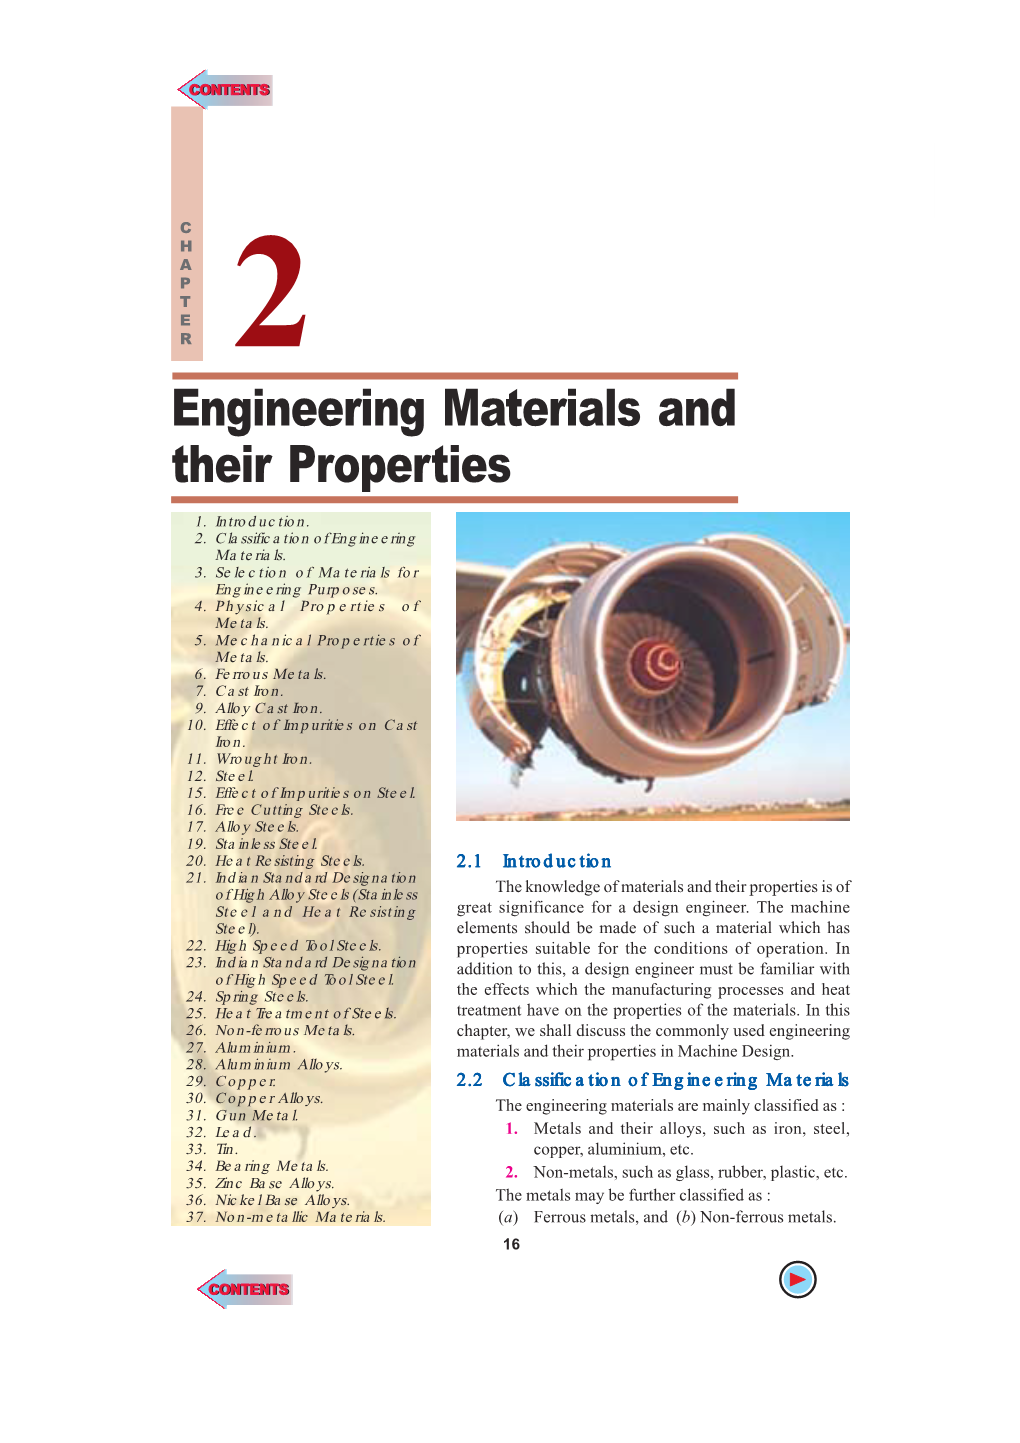 Engineering Materials and Their Properties